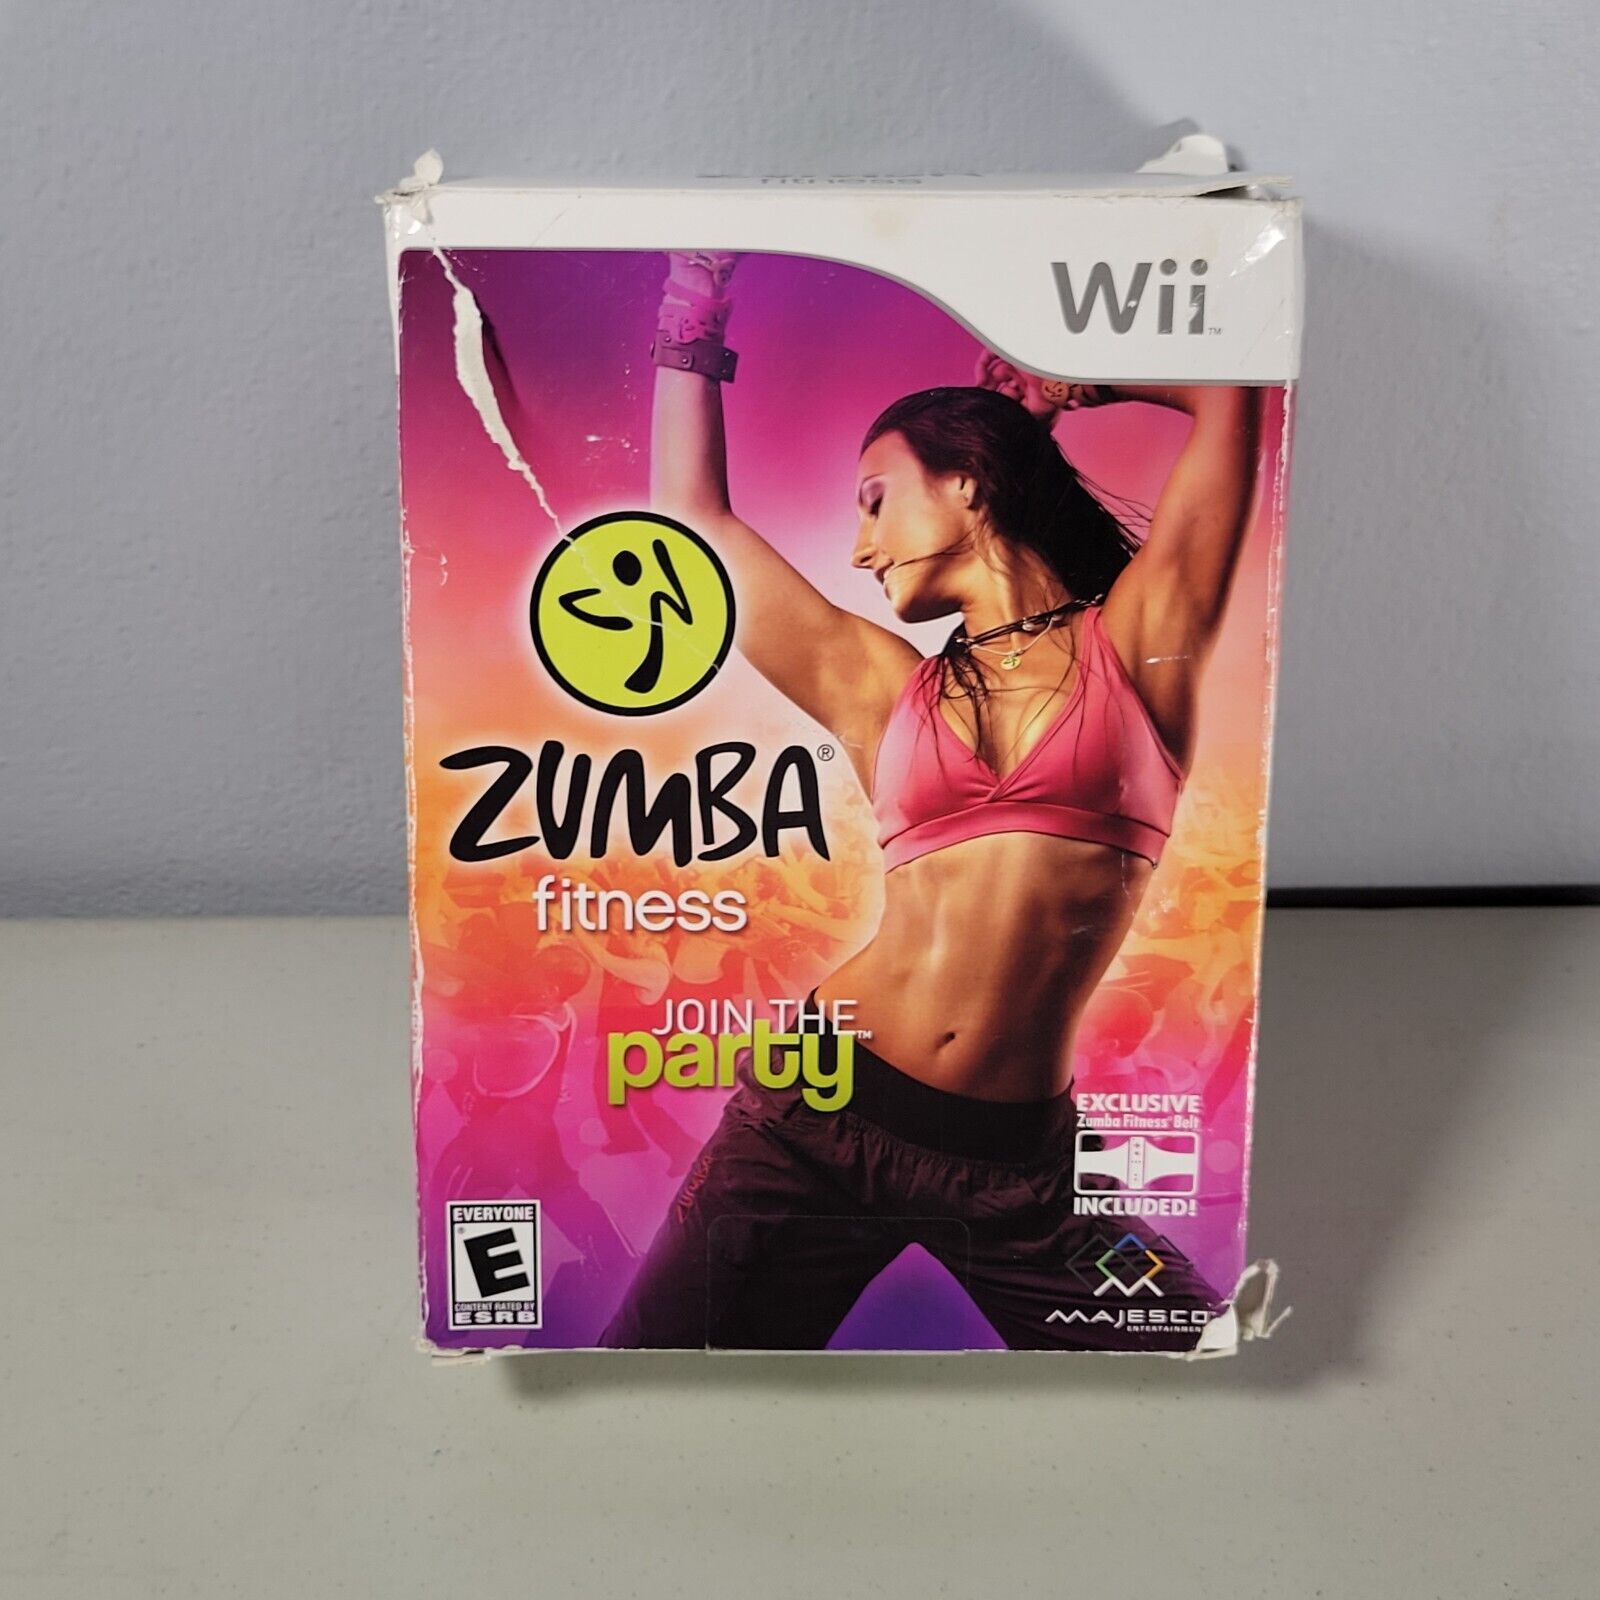 Zumba Fitness Wii Video Game Join The Party Plus Fitness Belt 2010 - $9.96